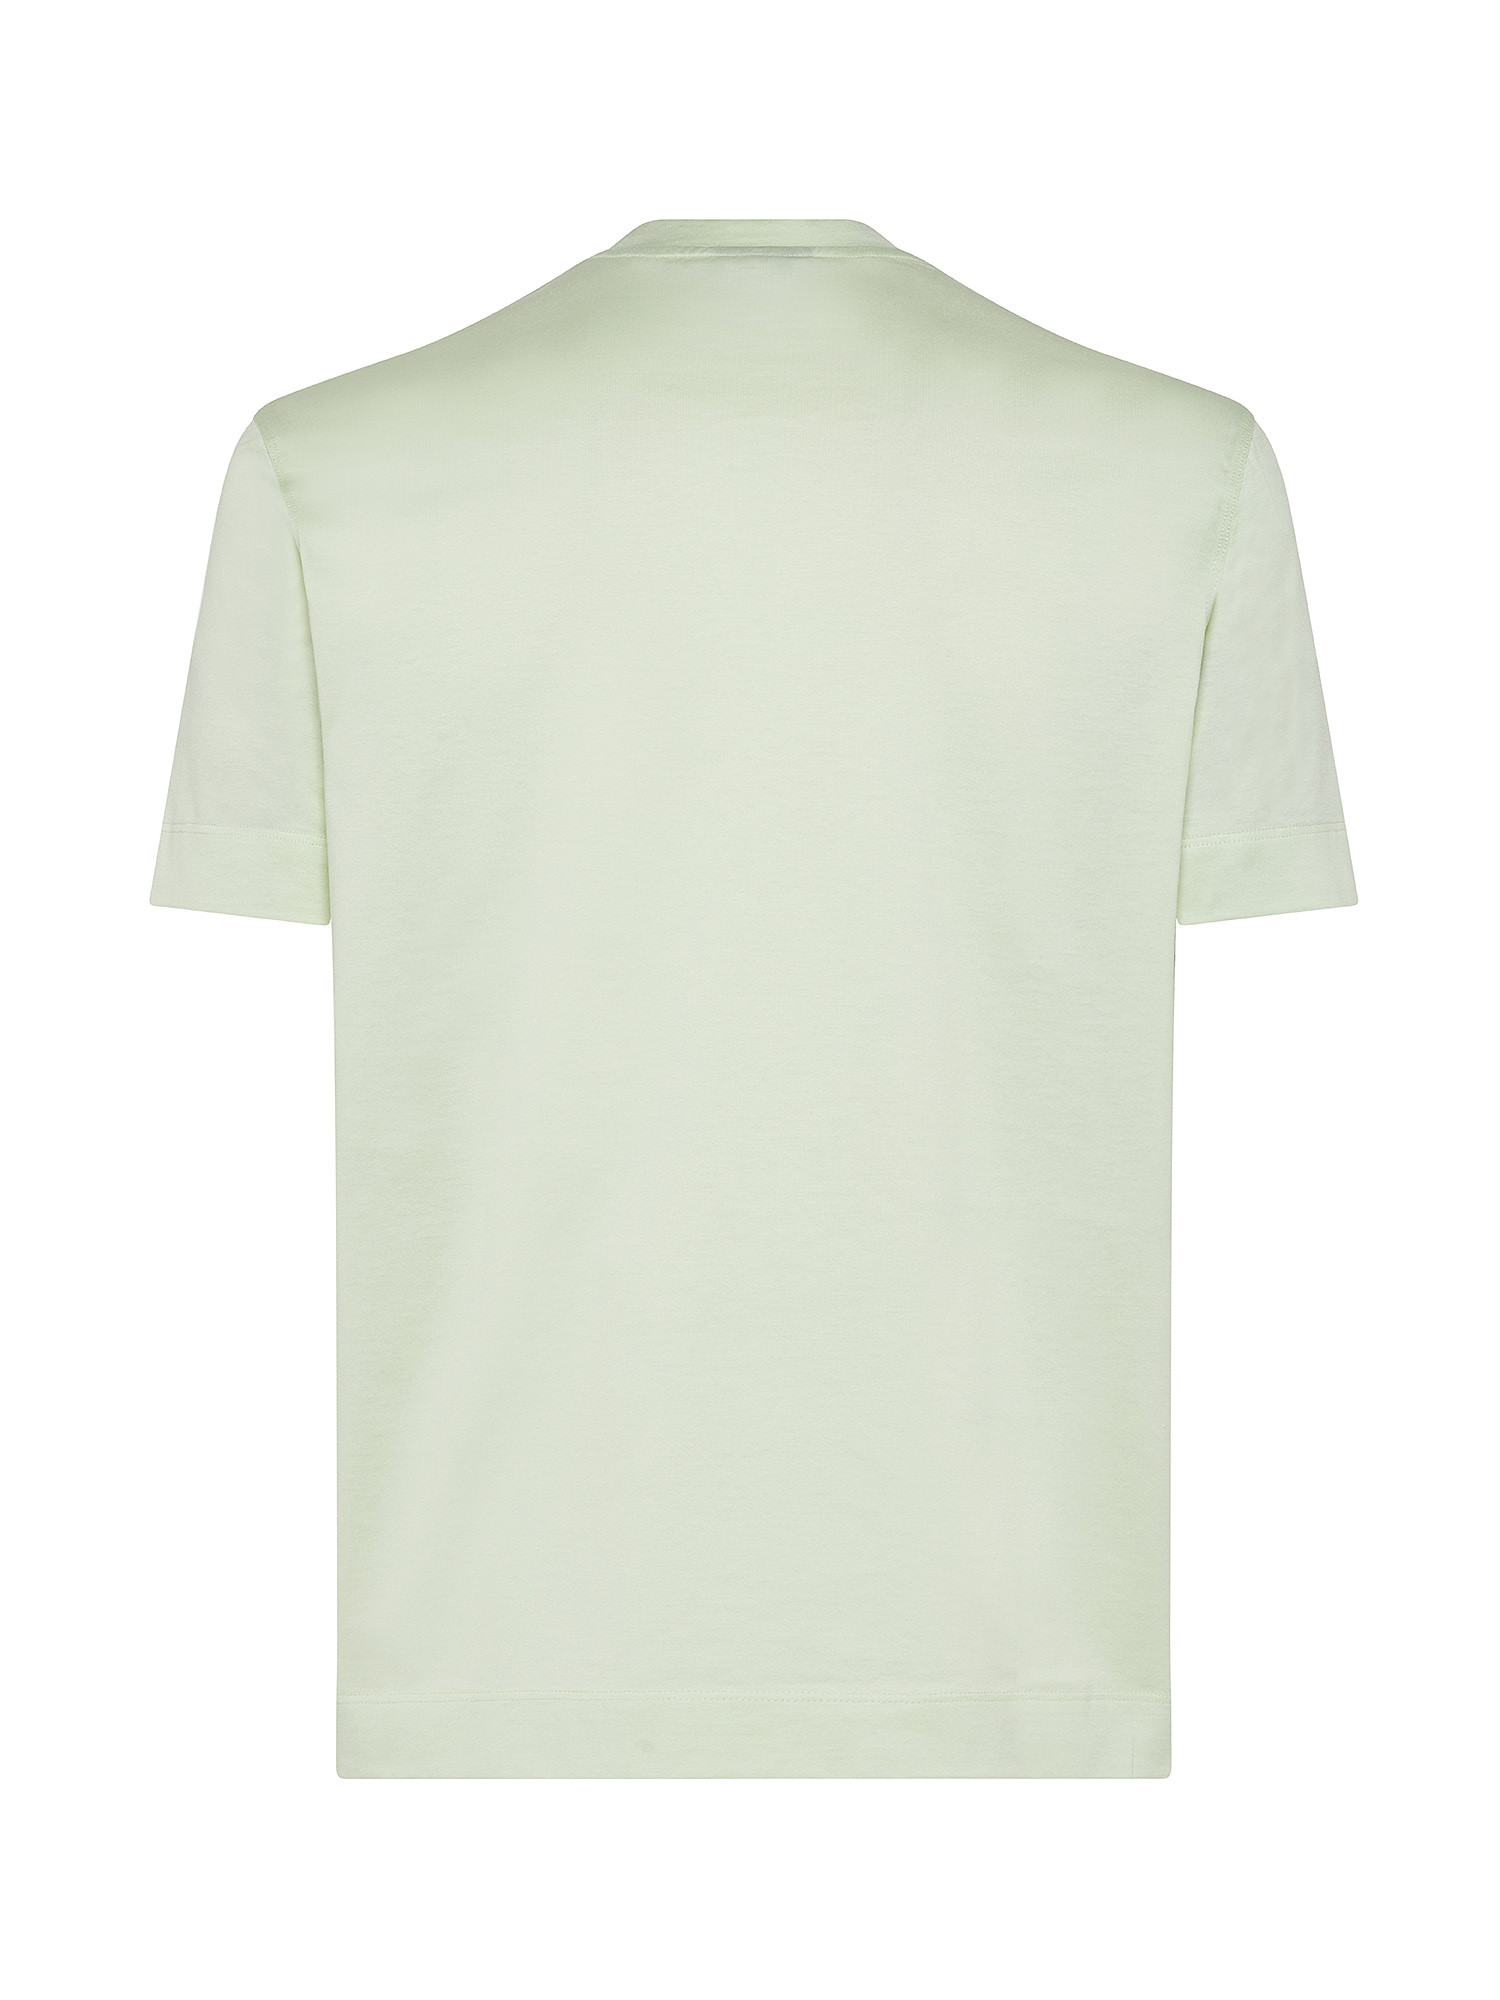 Emporio Armani - Cotton T-shirt with logo, Lime Green, large image number 1